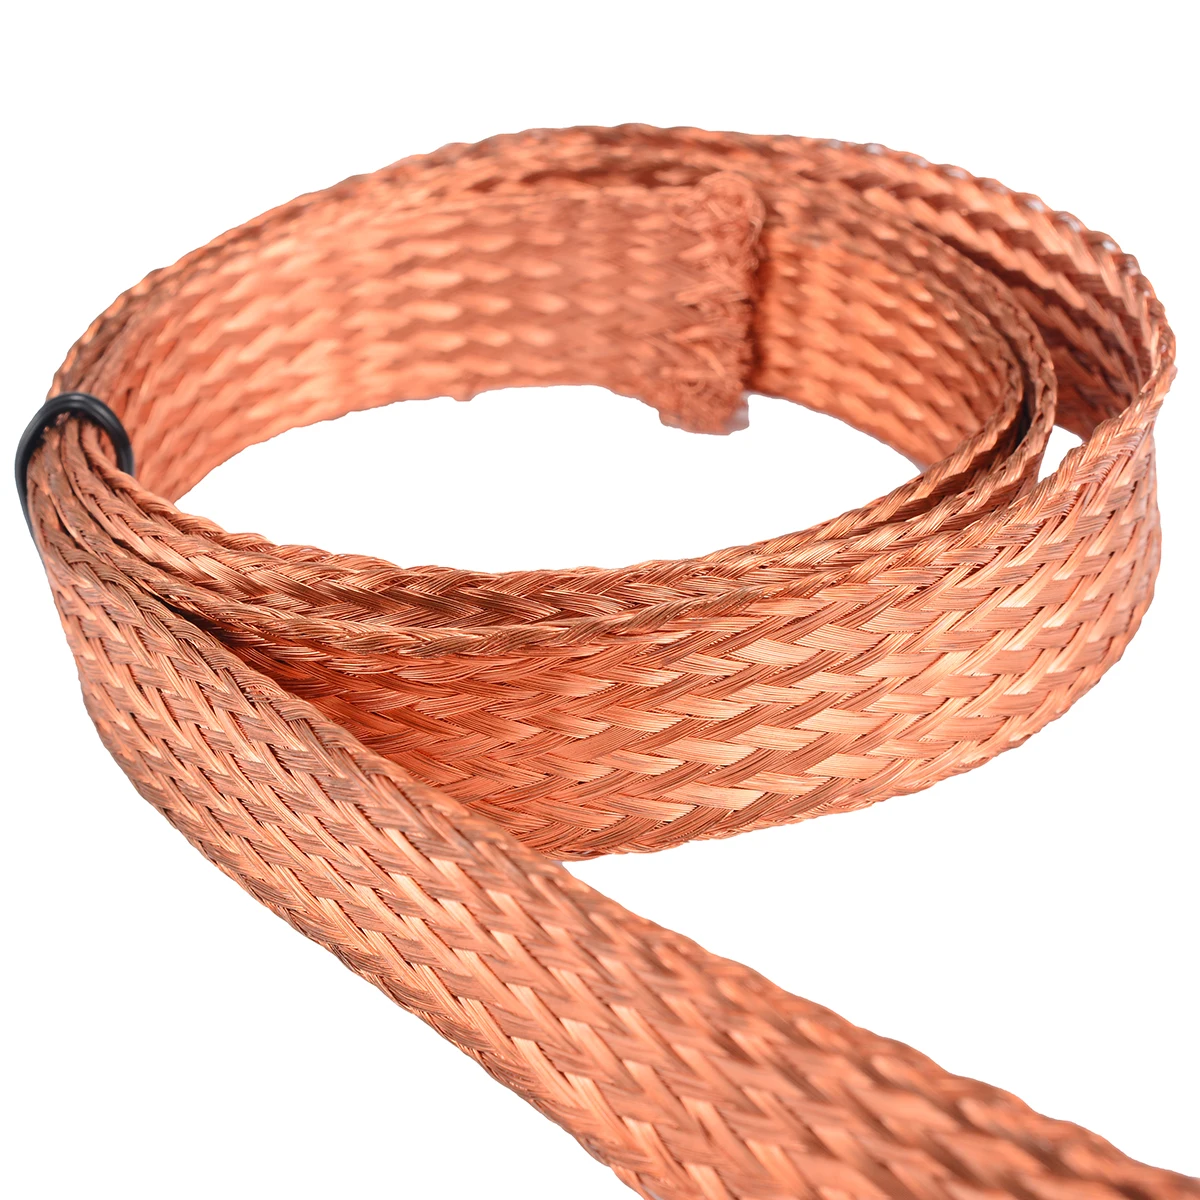 

Flat Pure Copper Braid Cable Bare Ground Lead Copper Braid Wires 1m 3.3ft x 15mm